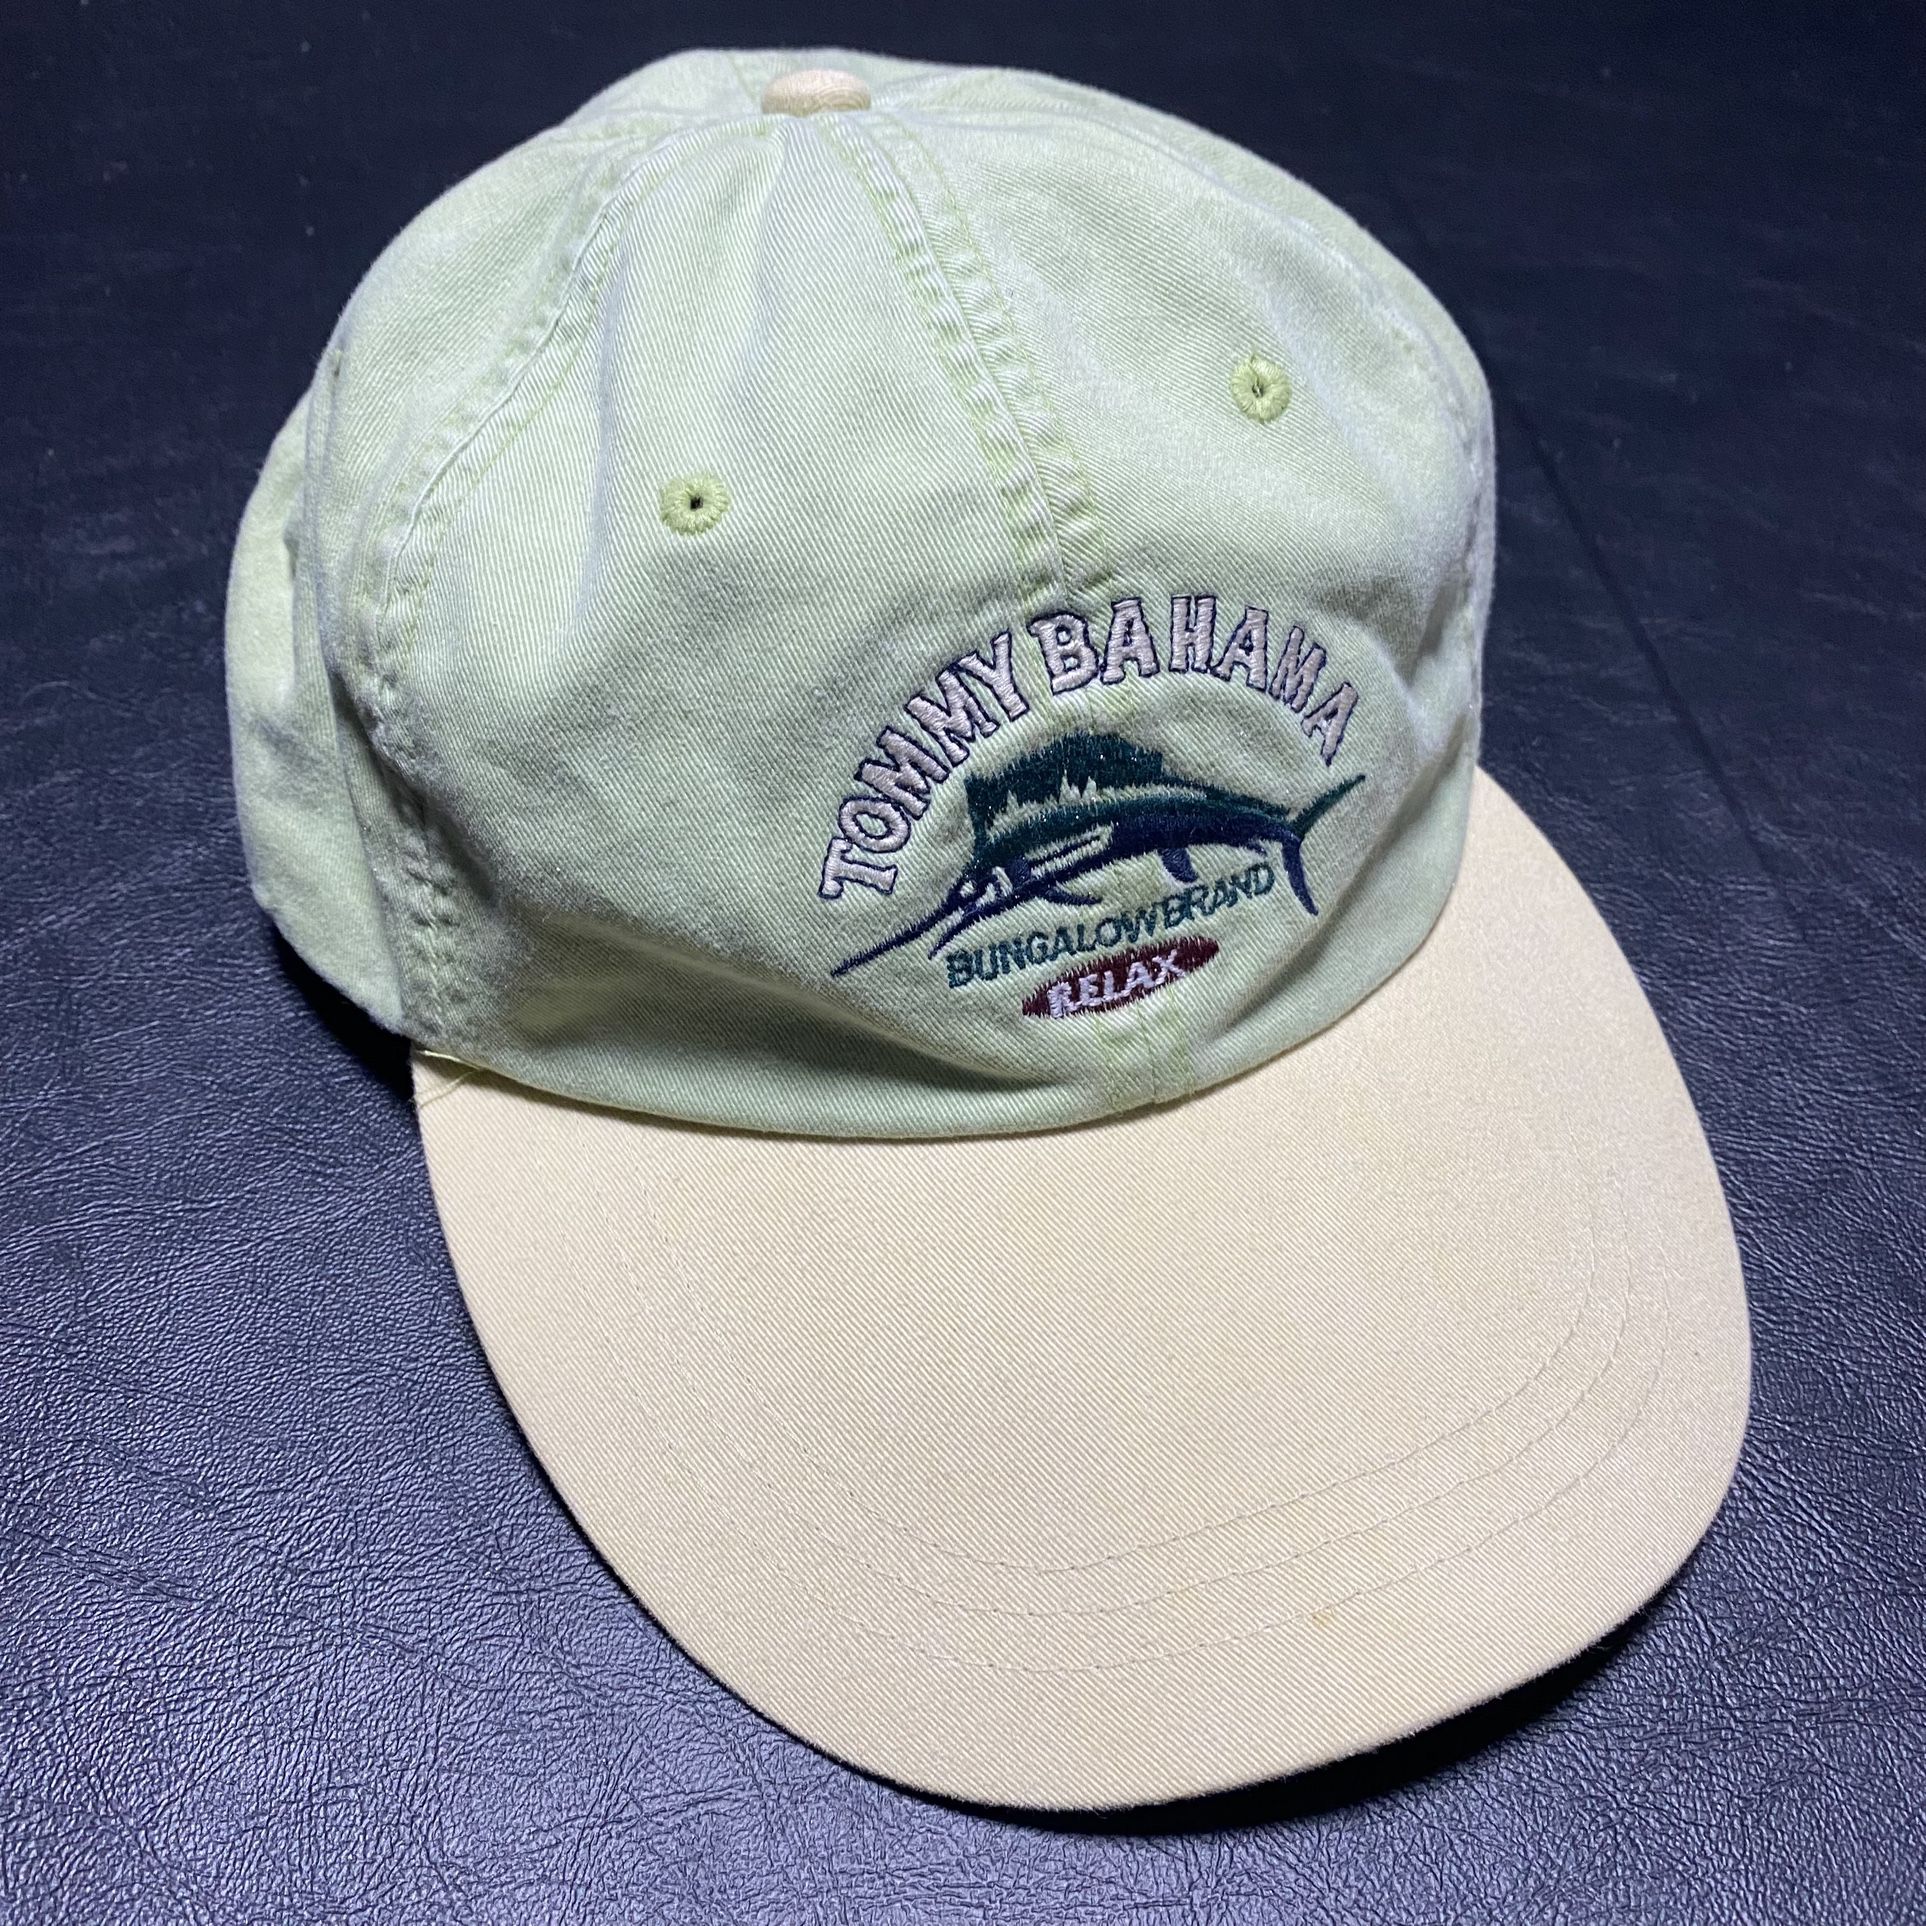 Tommy Bahama Relax Swordfish Outdoors Adjustable Dad Hat for Sale in  Tacoma, WA - OfferUp